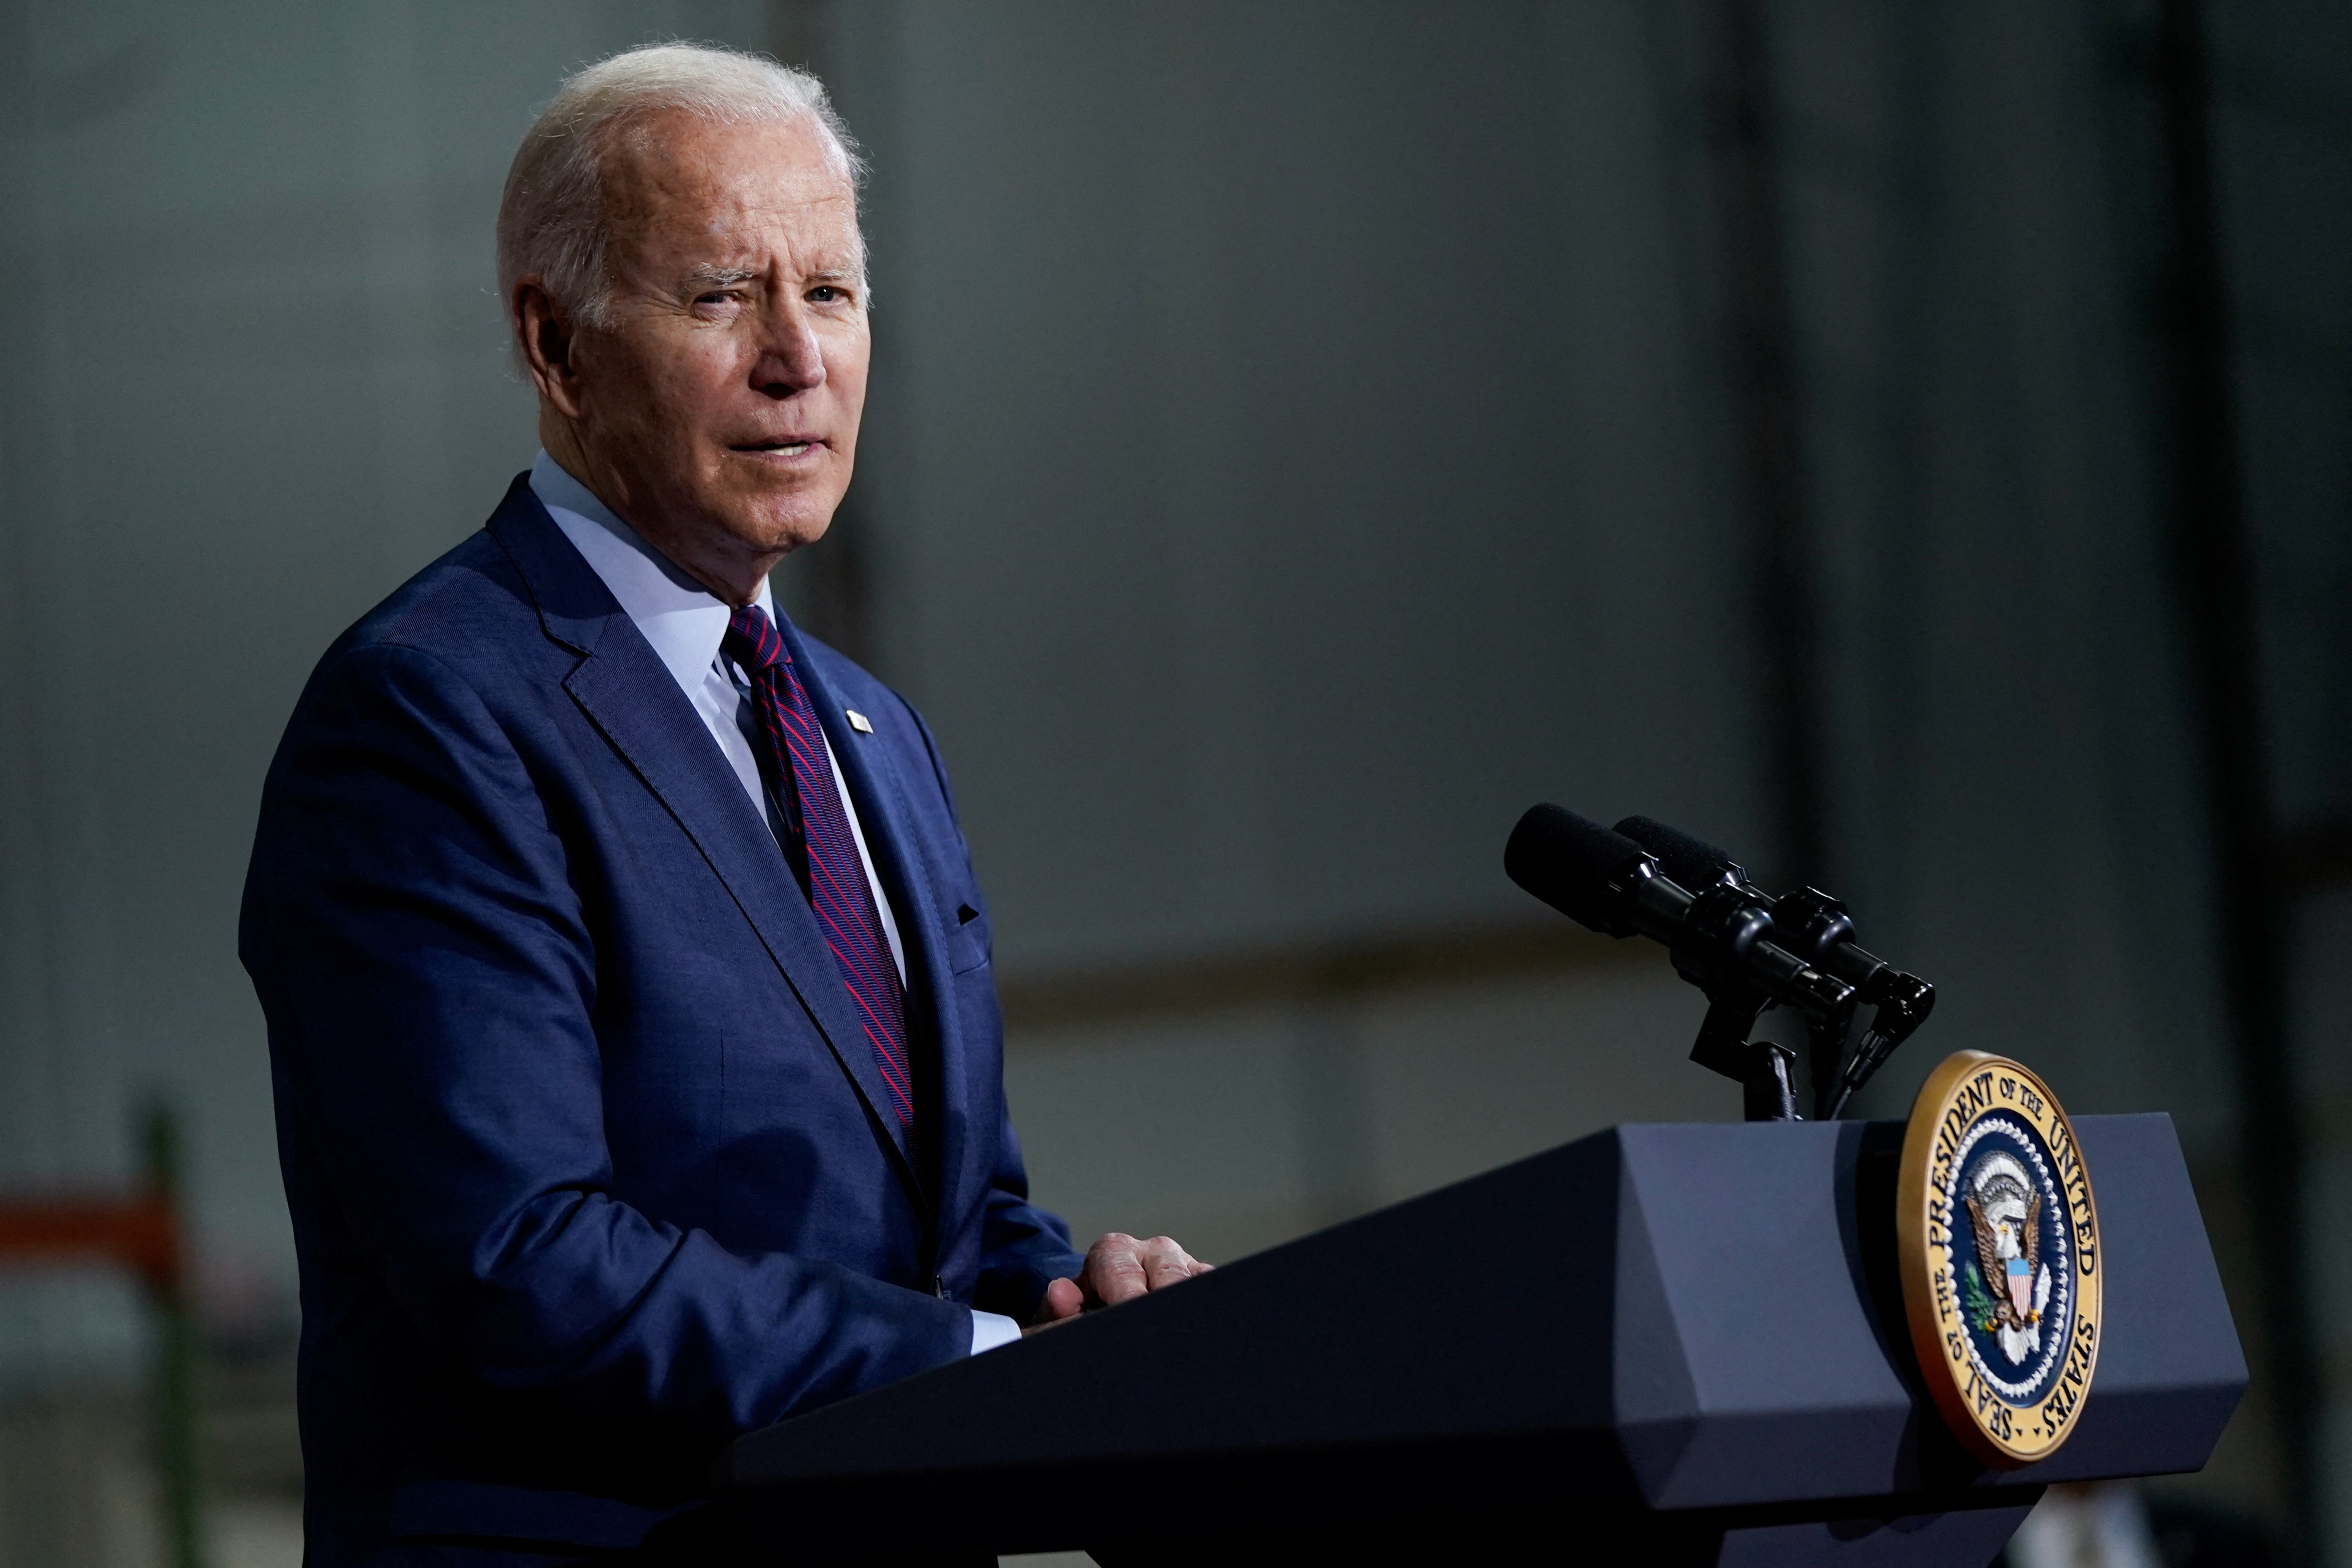 Biden calls on Congress to ‘immediately’ pass Ukraine aid bill, says COVID funding will ‘move separately’